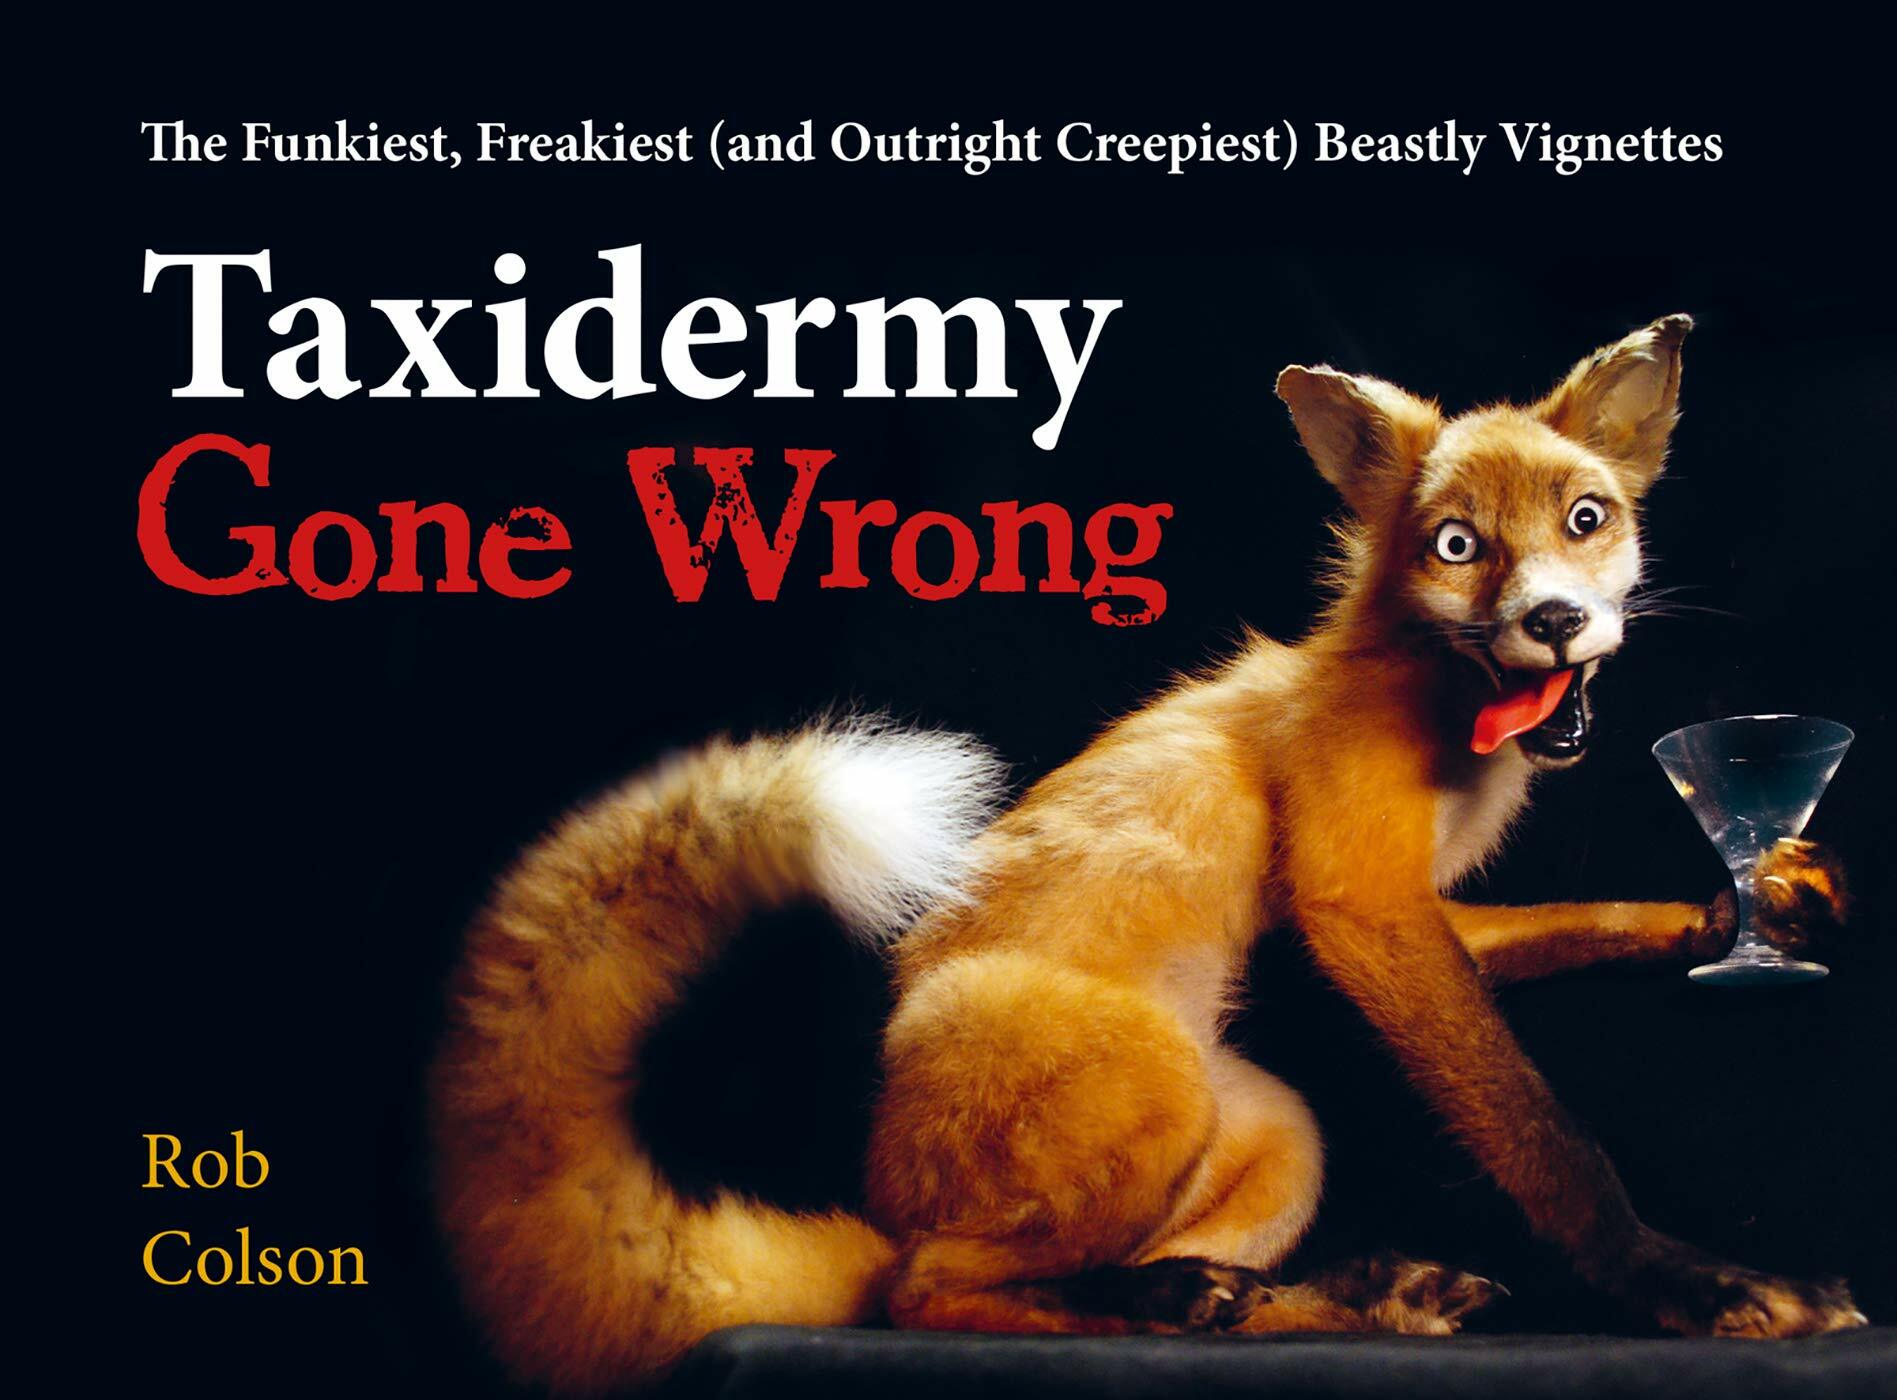 Taxidermy Gone Wrong: The Funniest, Freakiest (and Outright Creepiest) Beastly Vignettes (Hardcover)